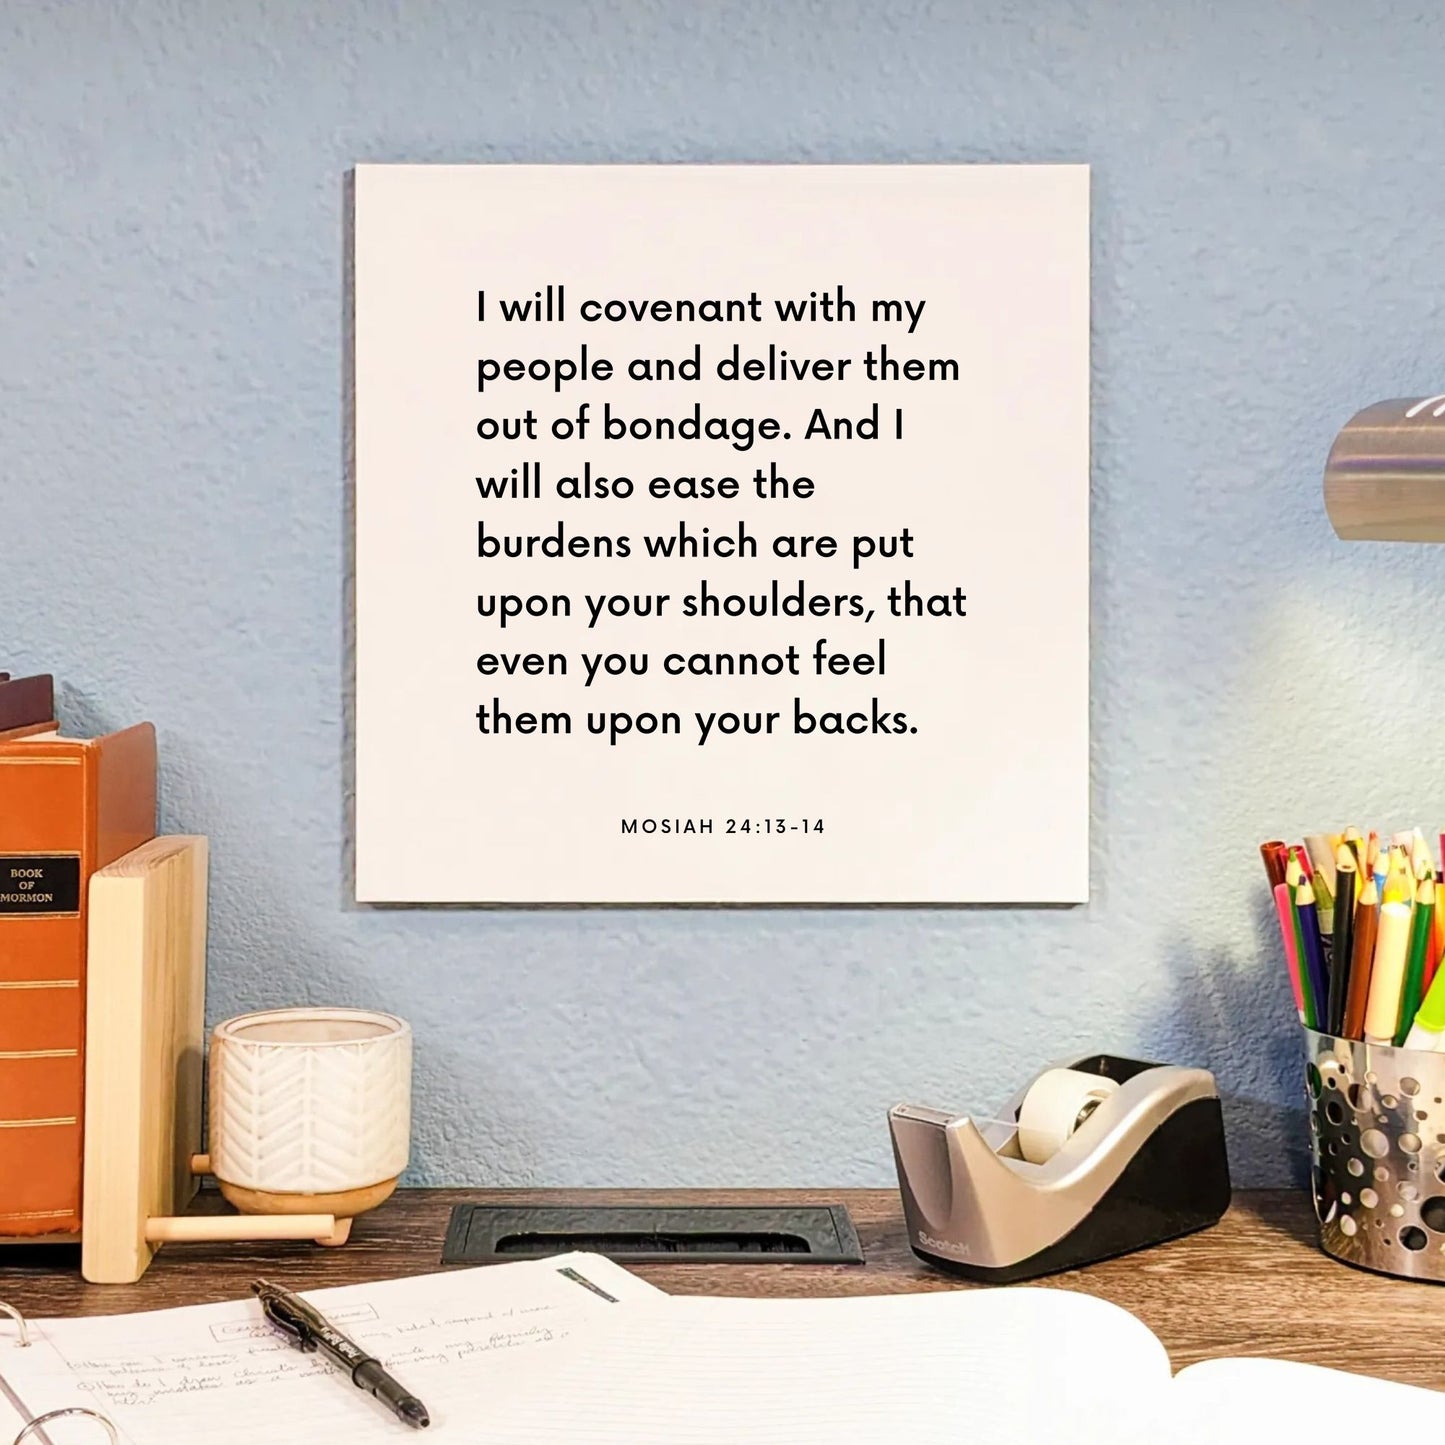 Desk mouting of the scripture tile for Mosiah 24:13-14 - "I will covenant with my people and deliver them"